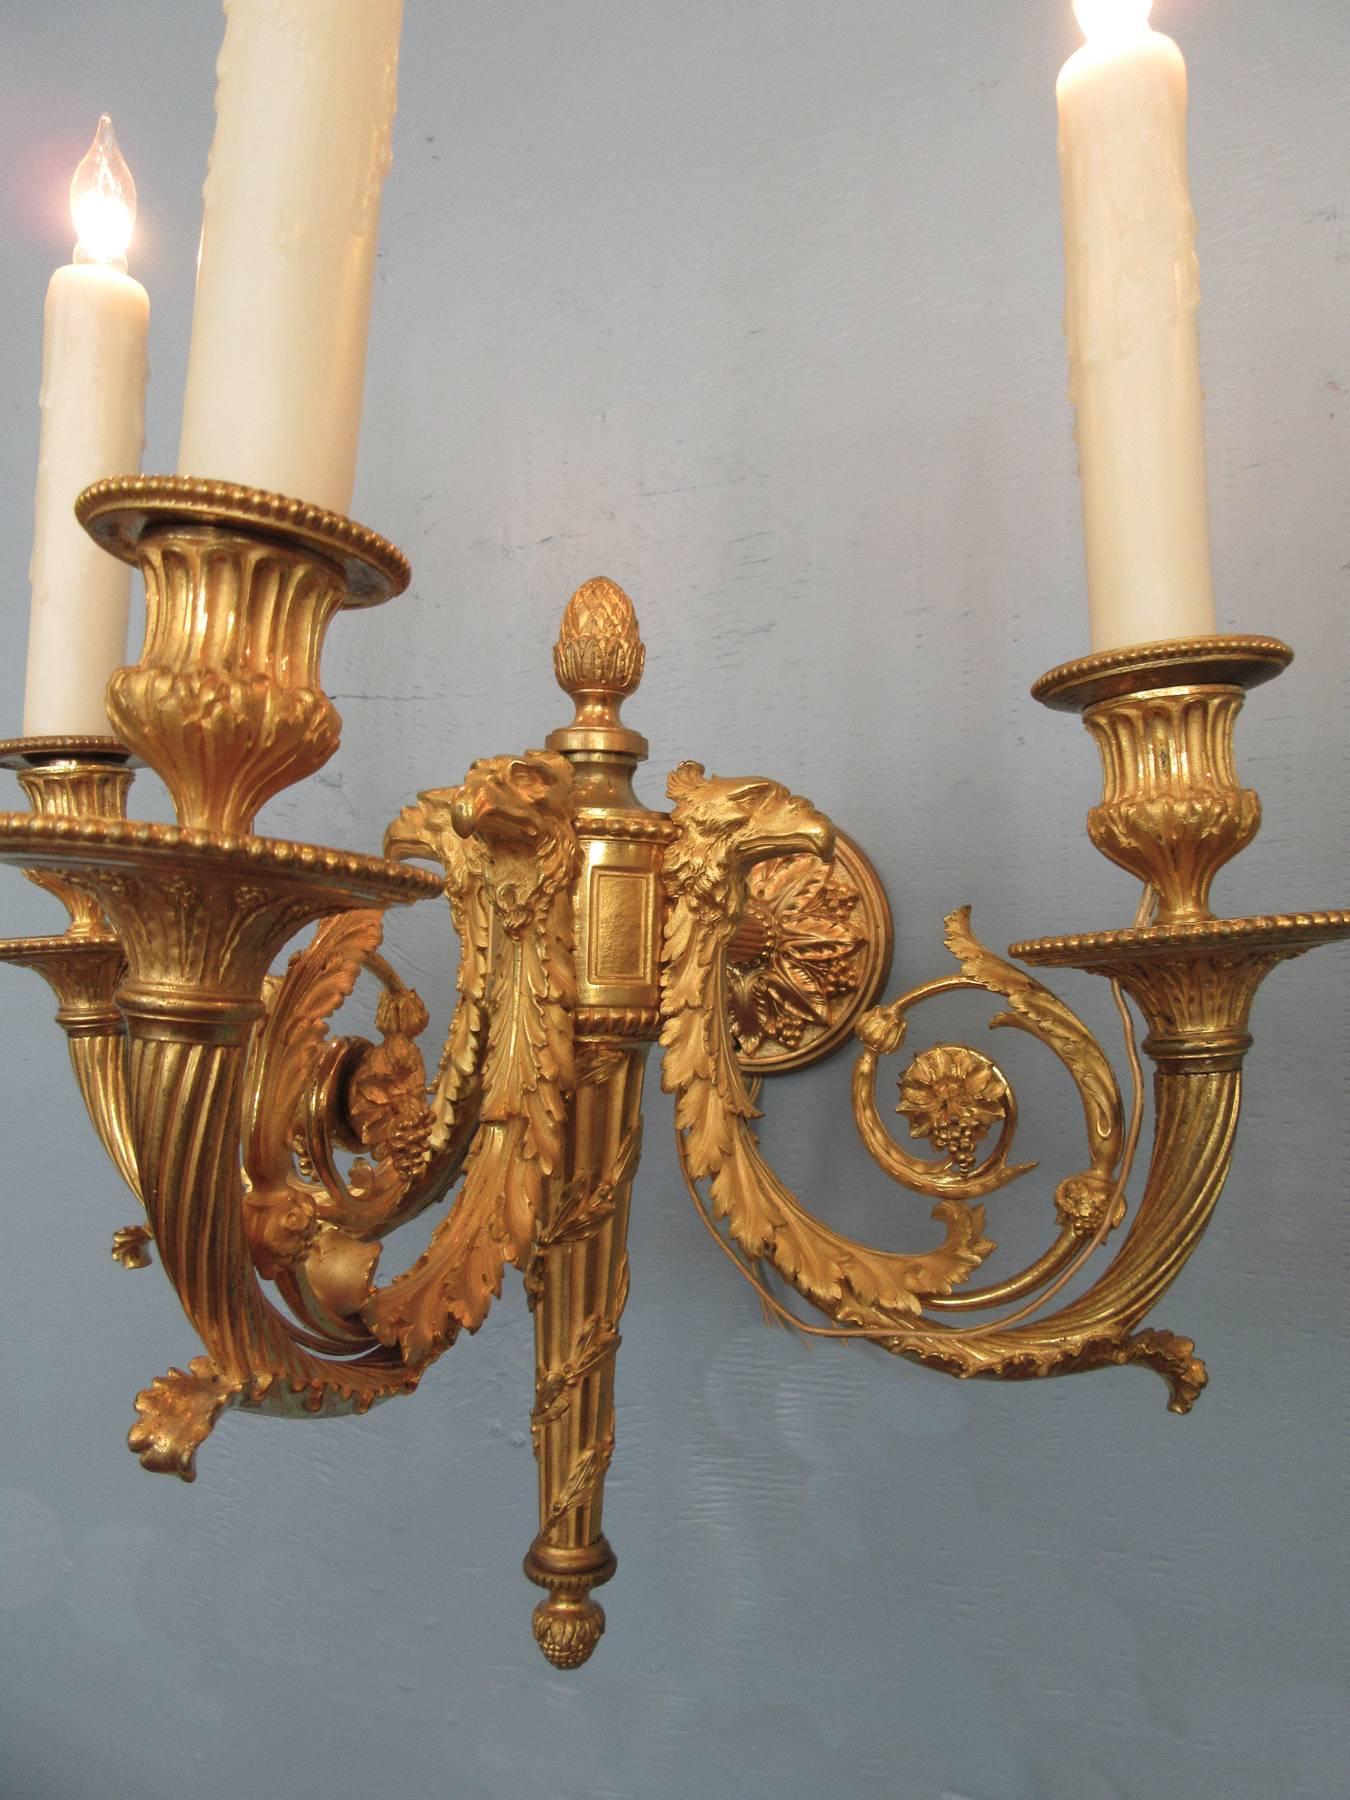 Pair of 19th Century French Empire Bronze Dore Sconces with Exceptional Casting For Sale 3